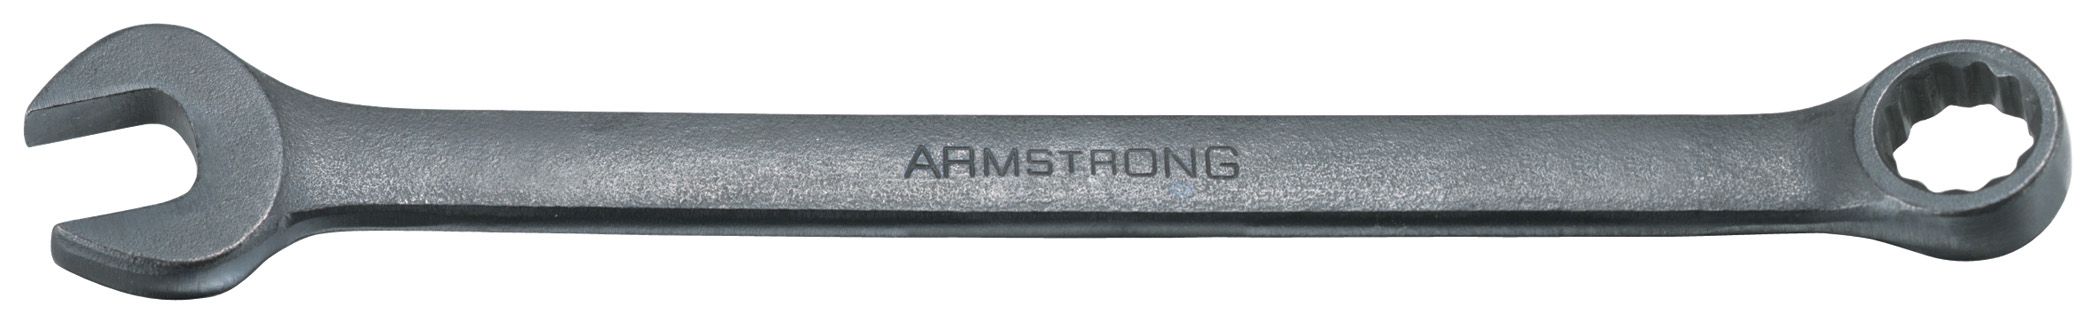 Armstrong 1-5/8 in. 12 pt. Black Oxide Long Combination Wrench